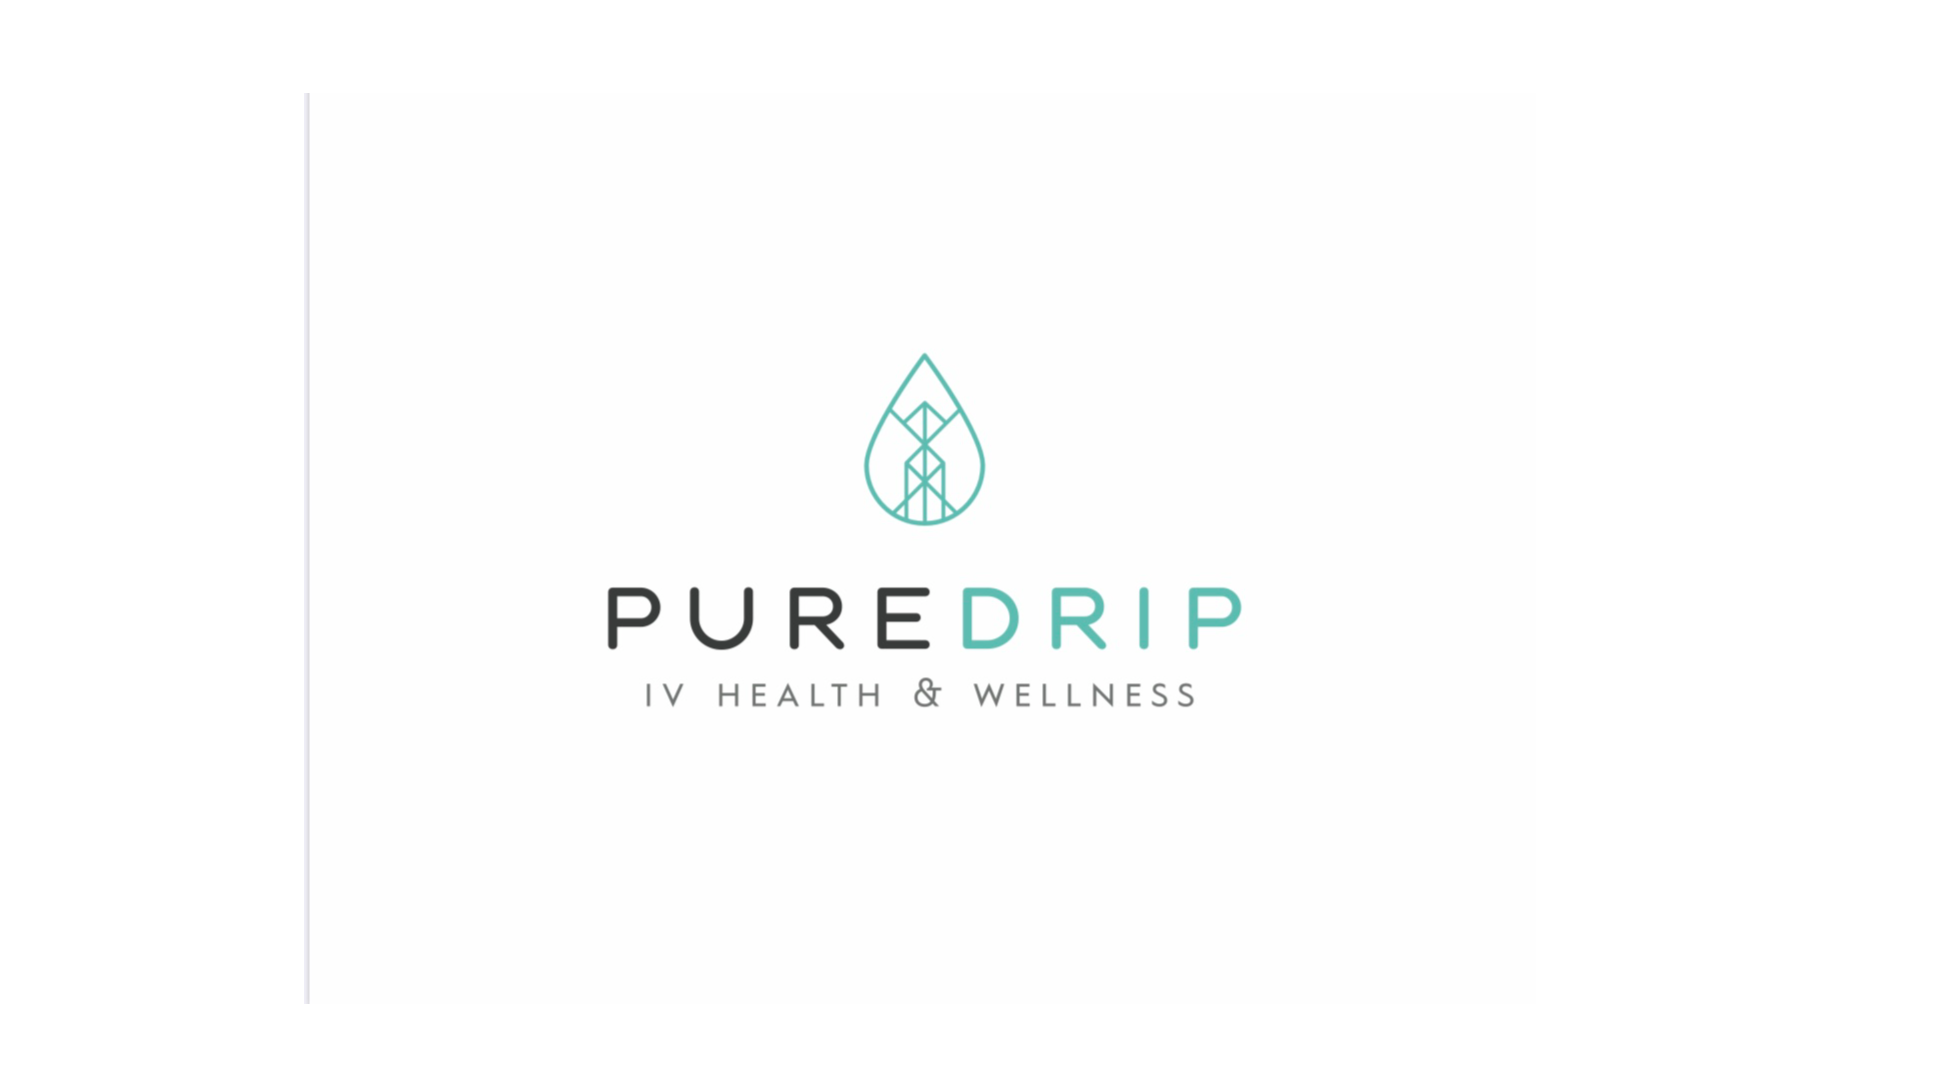 Pure Drip IV Health & Wellness’ IV Cocktails And Boosters Are For Everyone